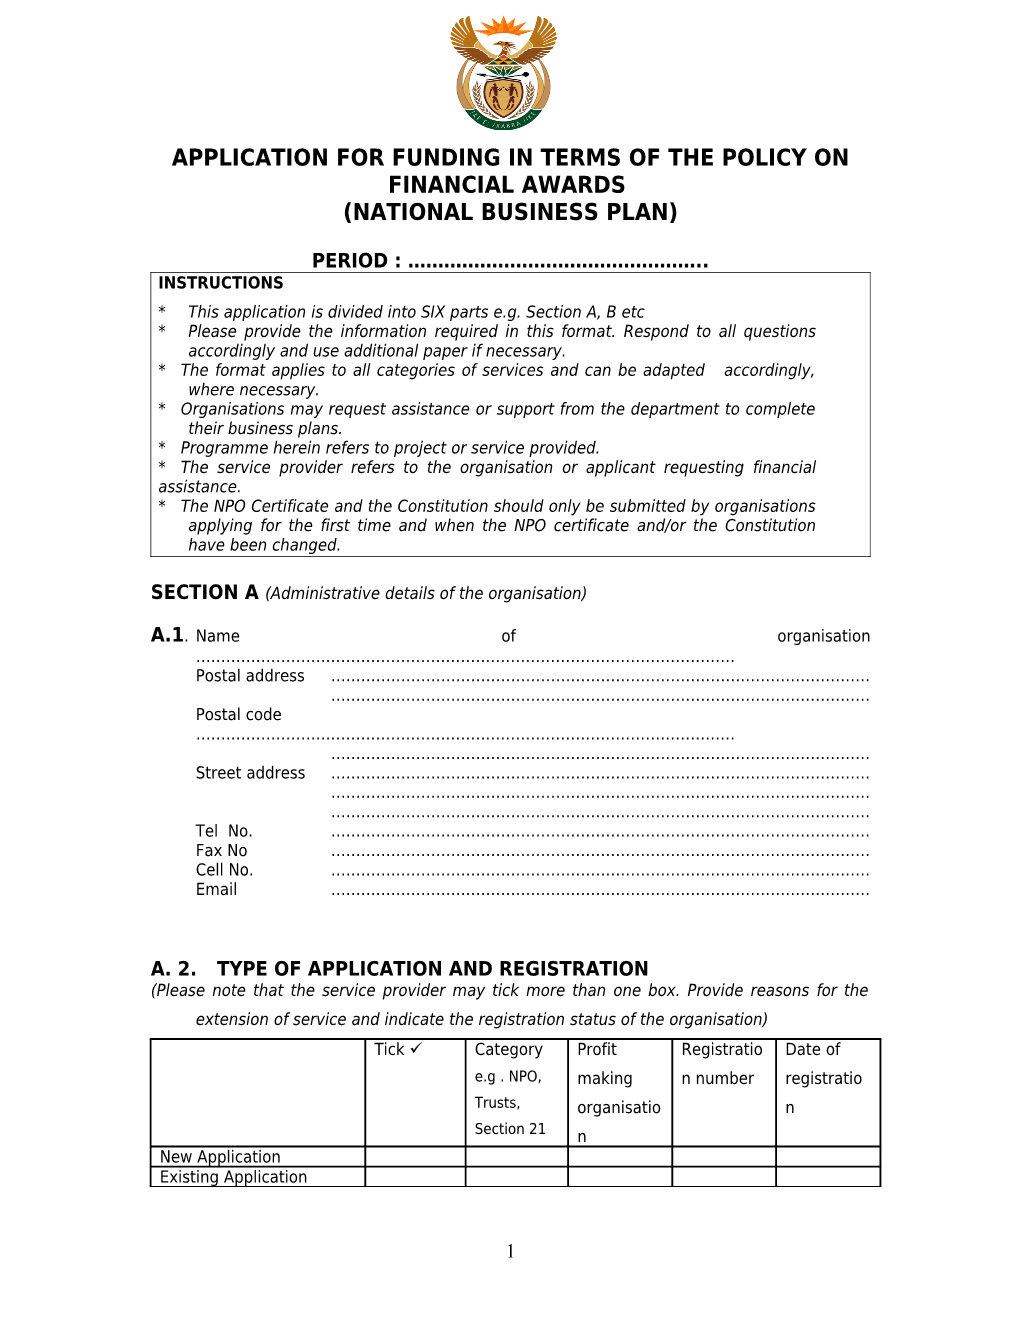 Application for Funding in Terms of the Policy on Financial Awards